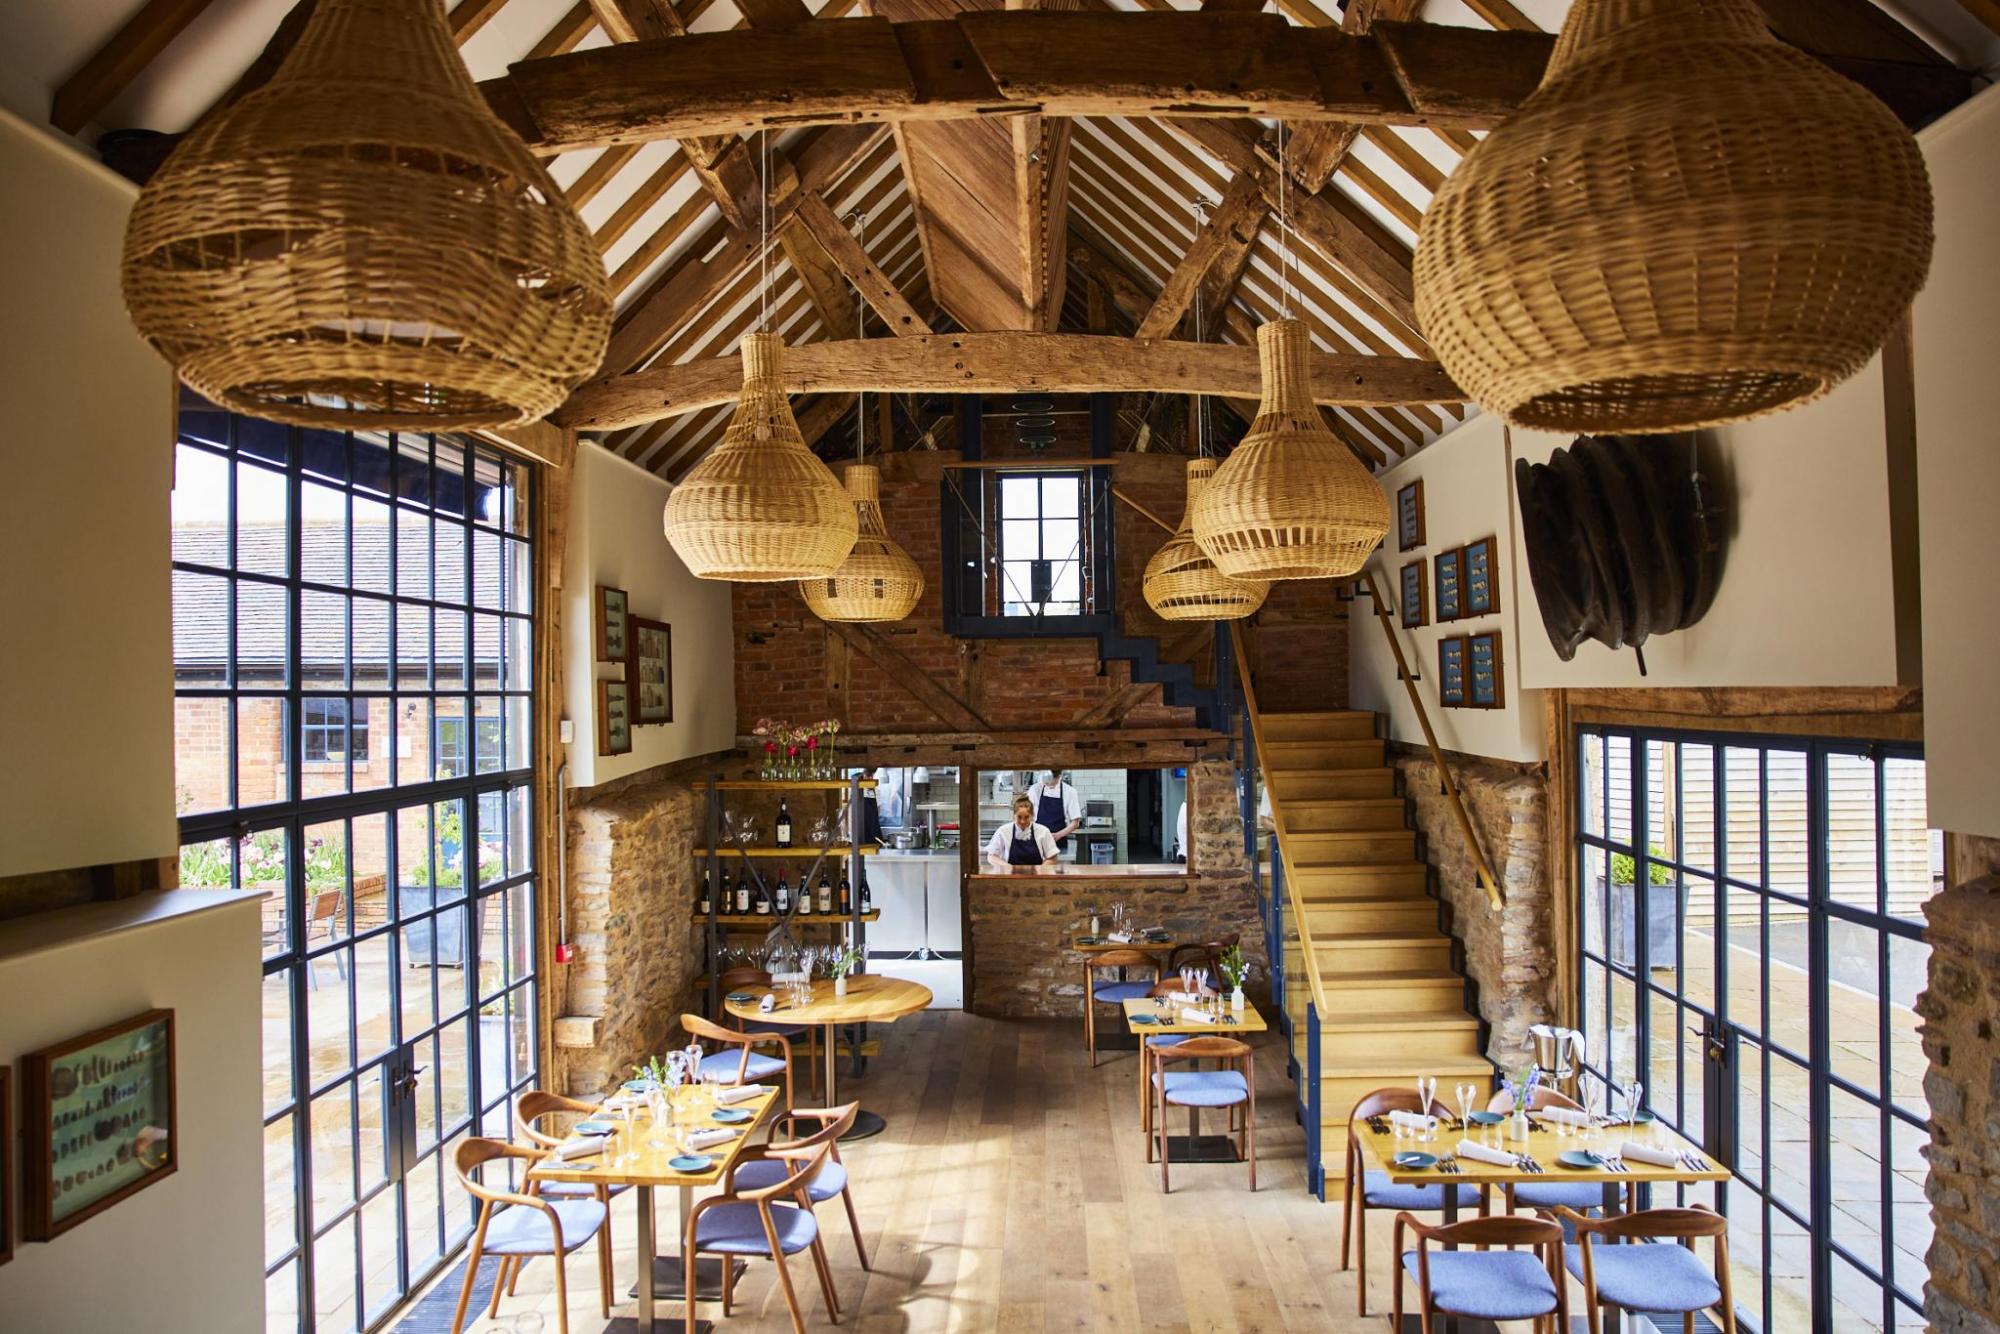 Interior shot of glass-side restaurant with wooden vaulted ceiling and open view of kitchen in rear